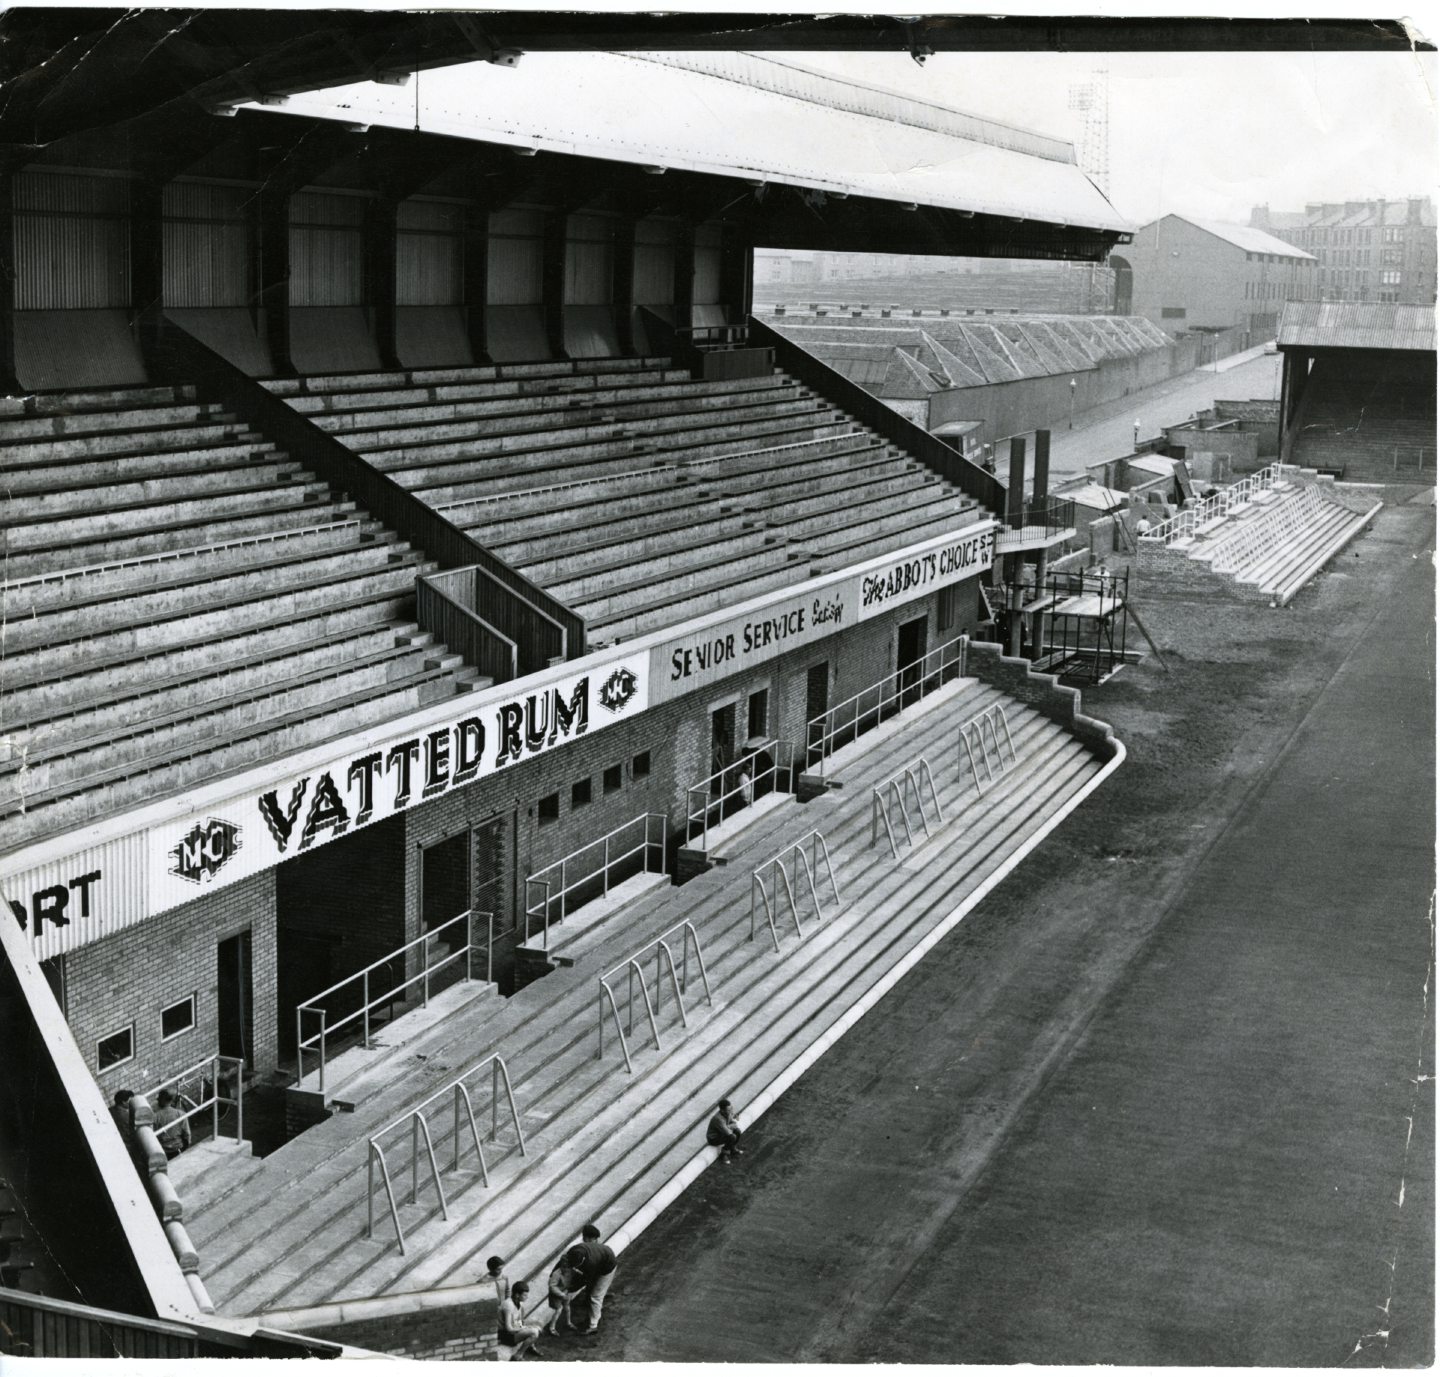 A view from Dundee United's main stand in 1965 following its construction back in 1962.